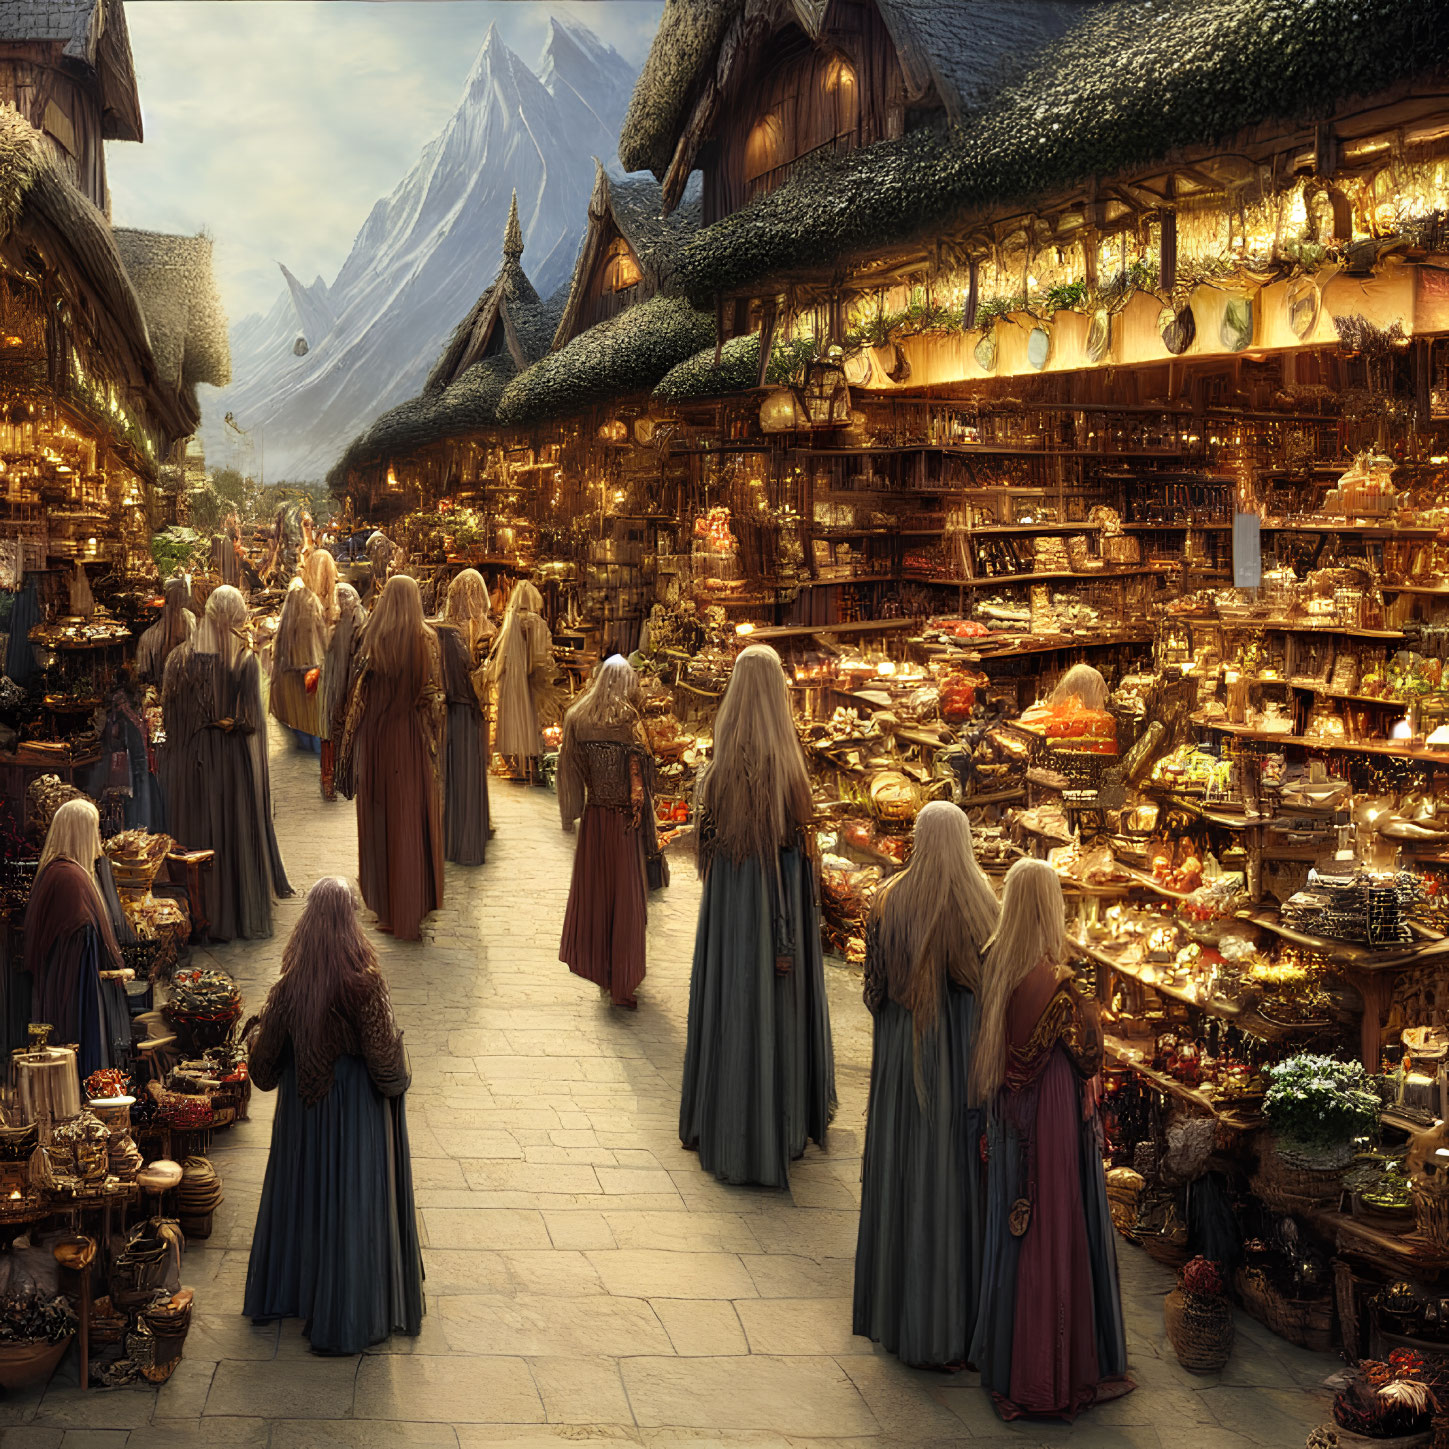 Medieval fantasy marketplace with vendors and shoppers under twilight sky